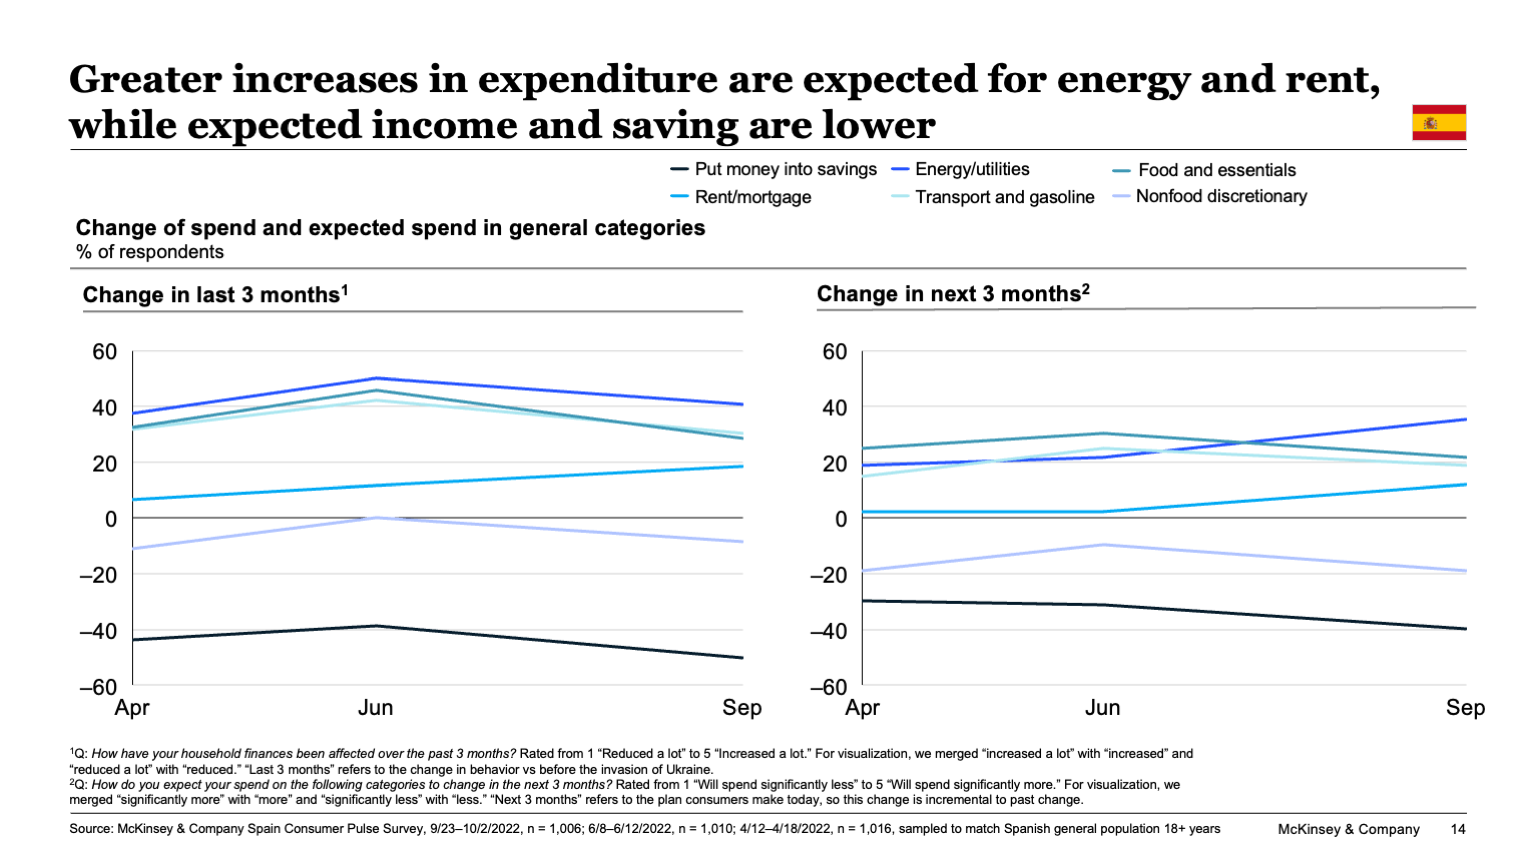 Greater increases in expenditure are expected for energy and rent, while expected income and saving are lower